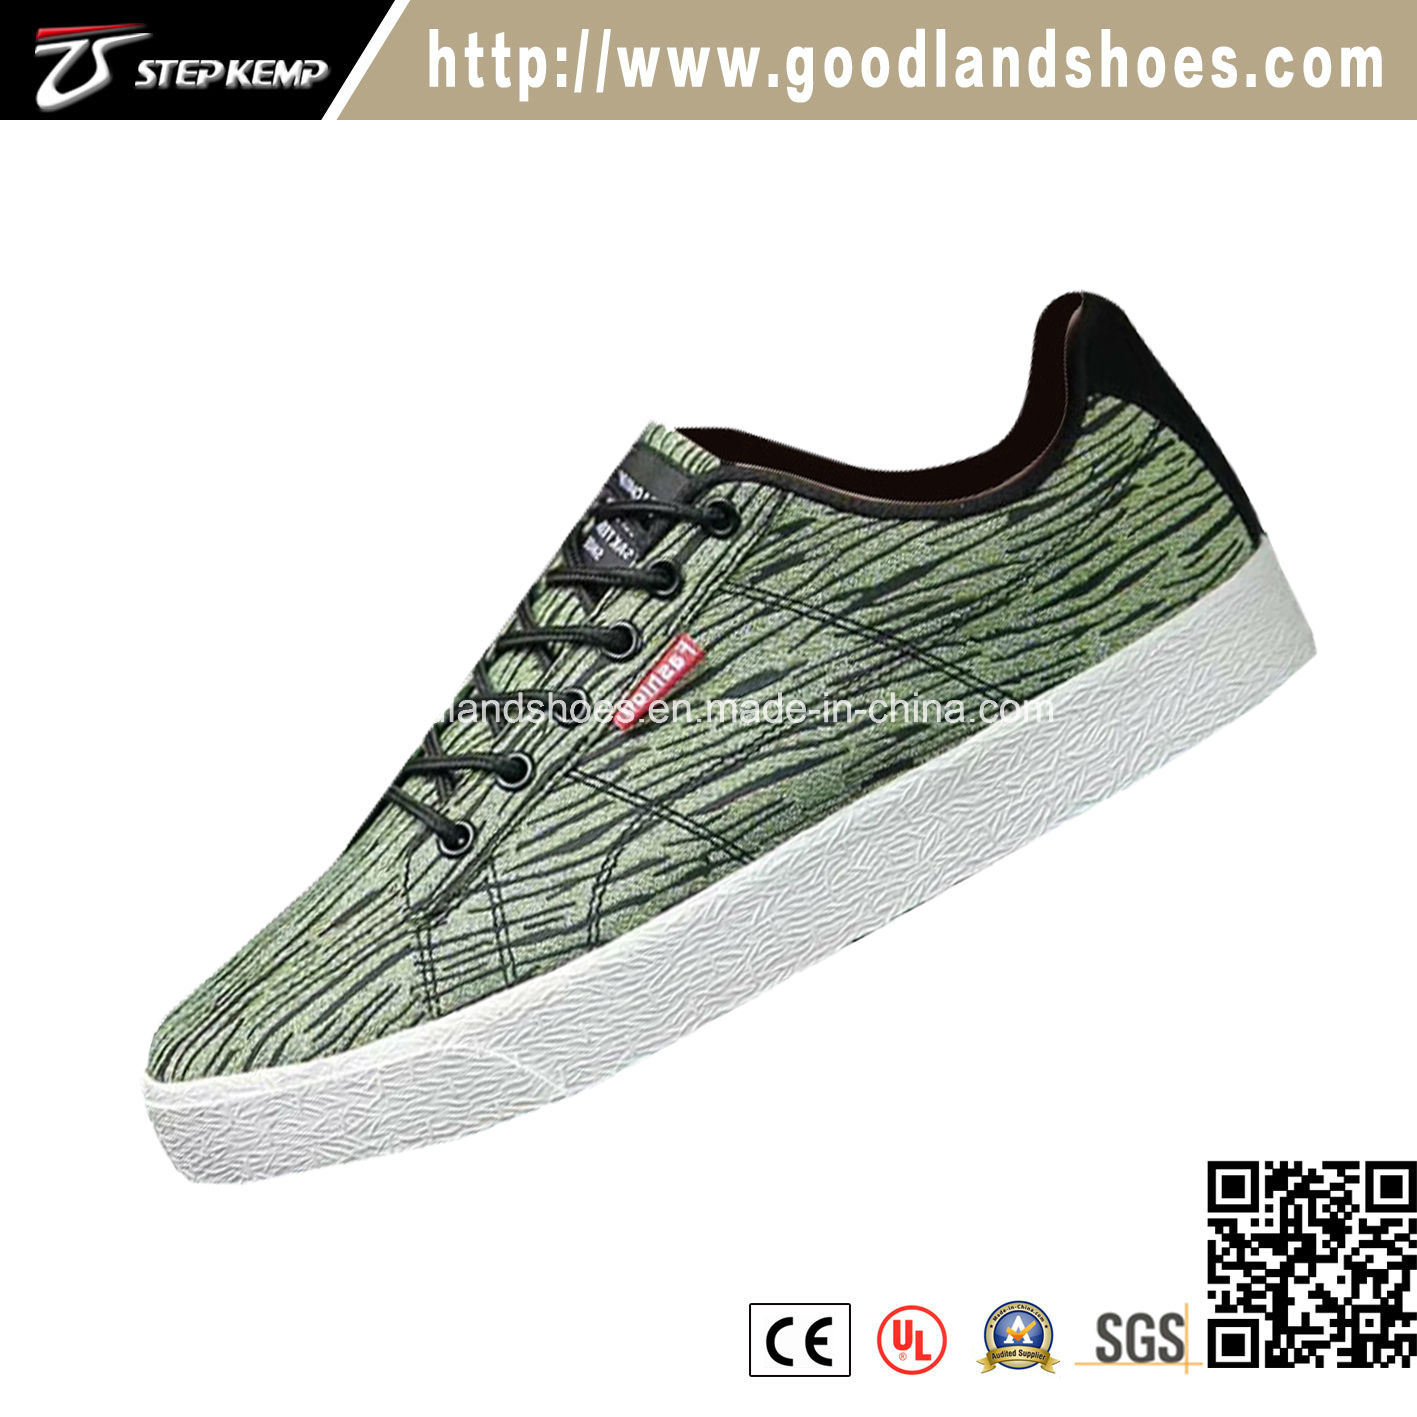 New Fashion Design Casual Skate Shoes for Women and Men 20159-1